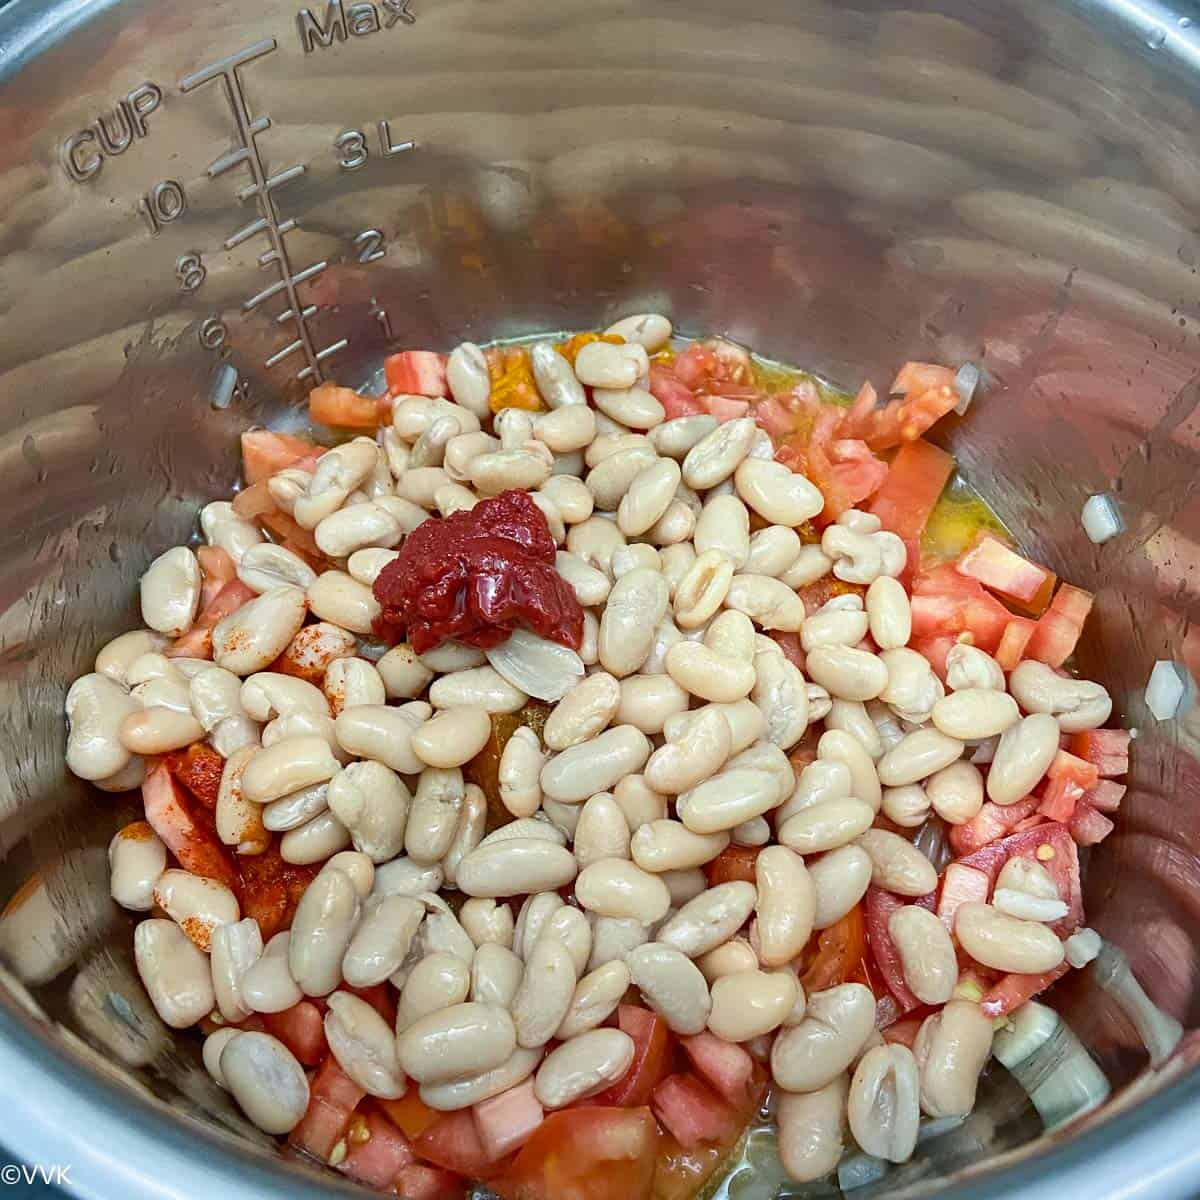 add beans tomato paste and broth